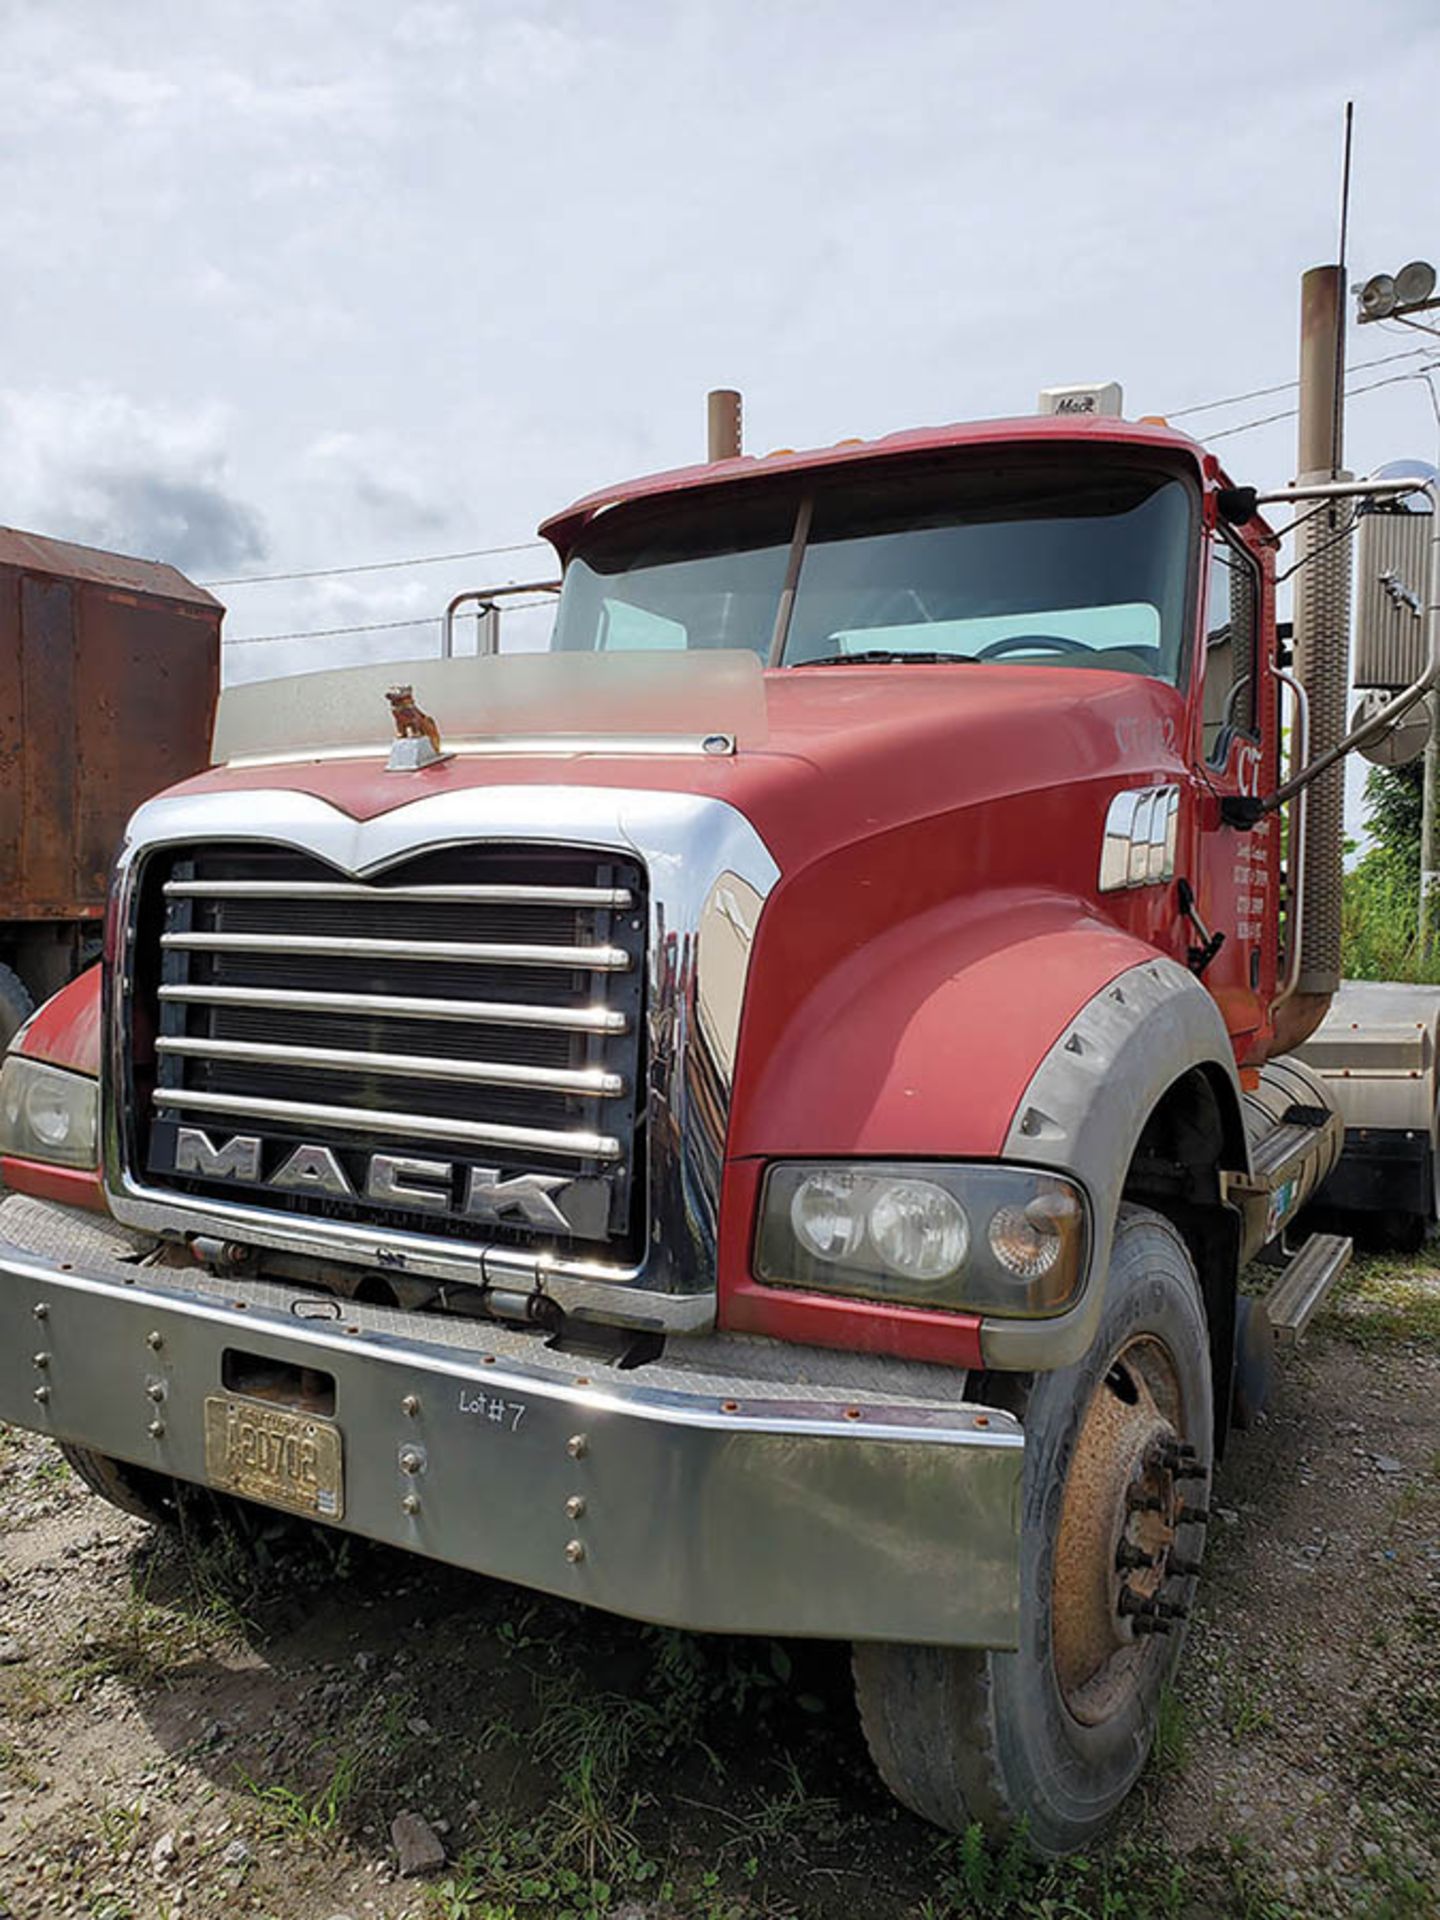 2009 MACK GU713 T/A DAY CAB TRACTOR, MAXITORQUE 18 SPEED TRANS., WET LINES MACK INLINE SIX DIESEL - Image 3 of 11